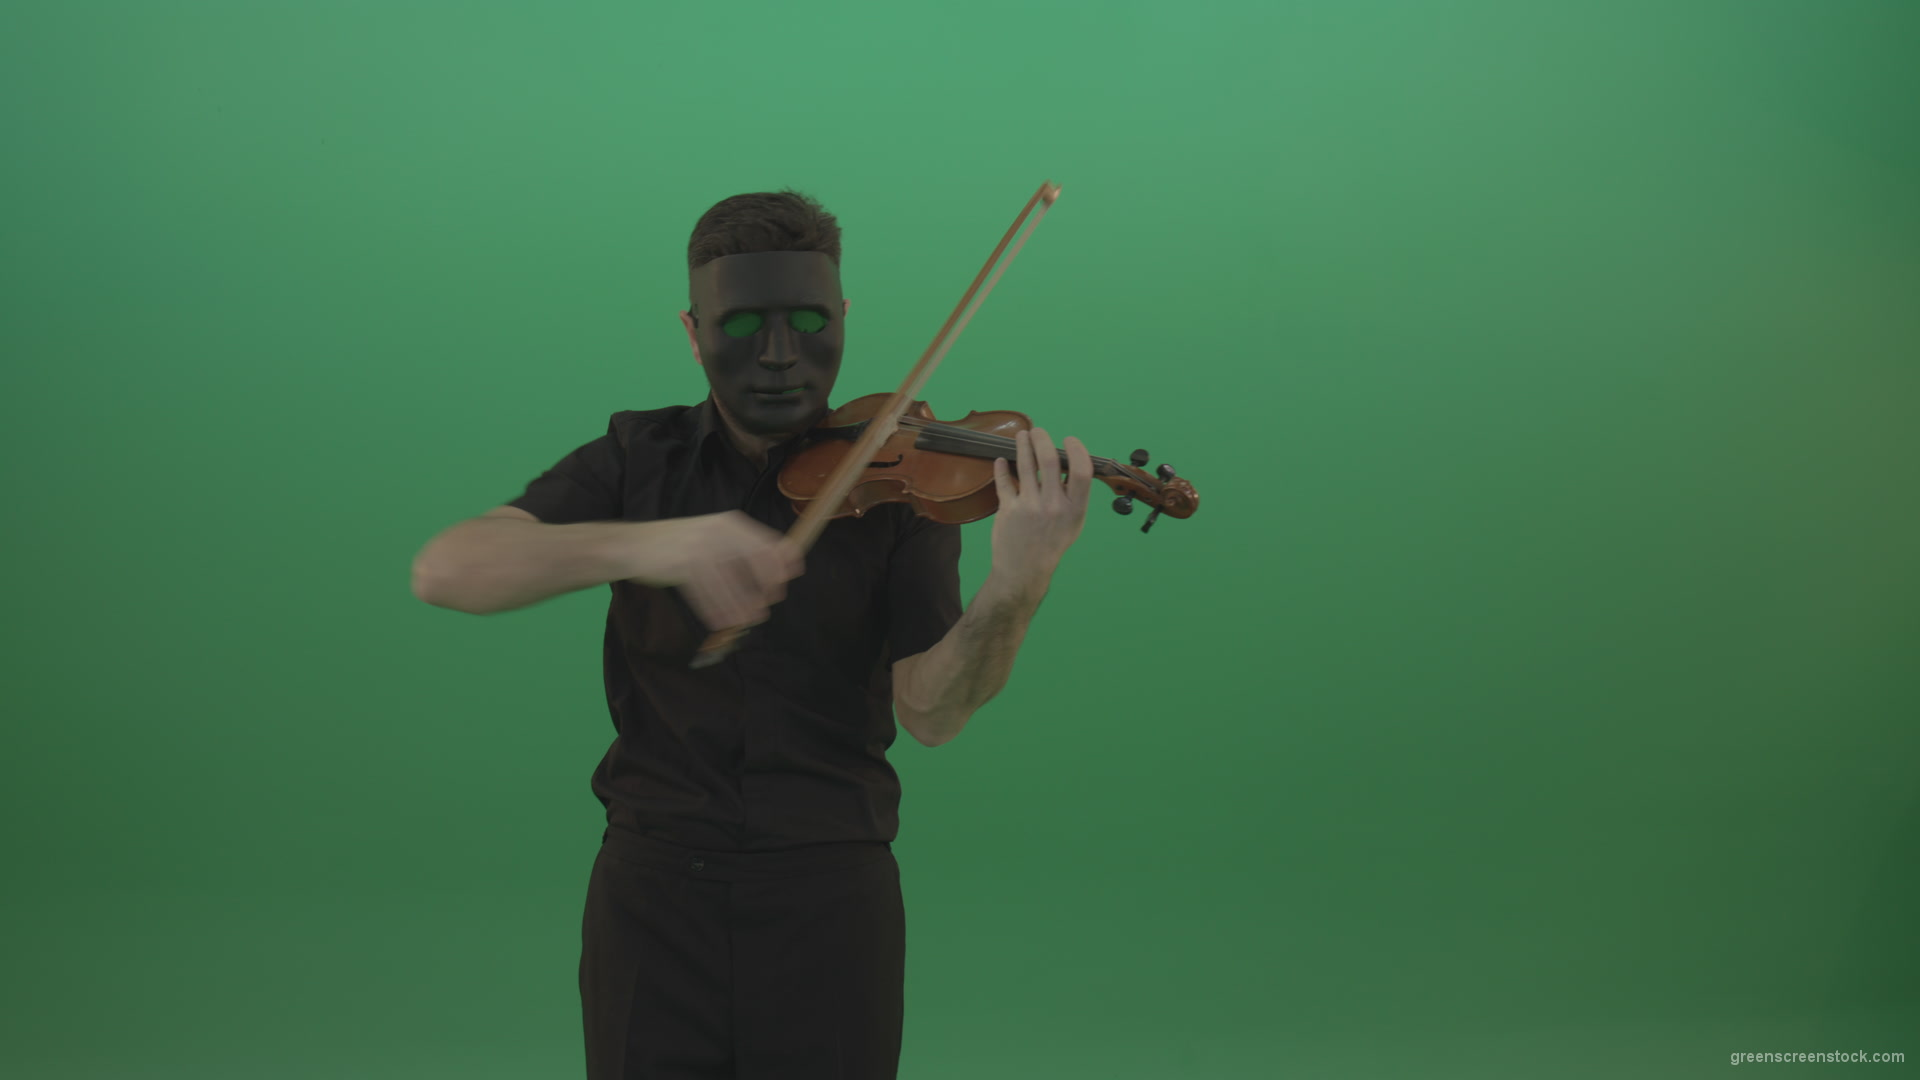 Man-in-black-shirt-and-mask-fast-play-violin-fiddle-strings-gothic-music-isolated-on-green-screen_008 Green Screen Stock